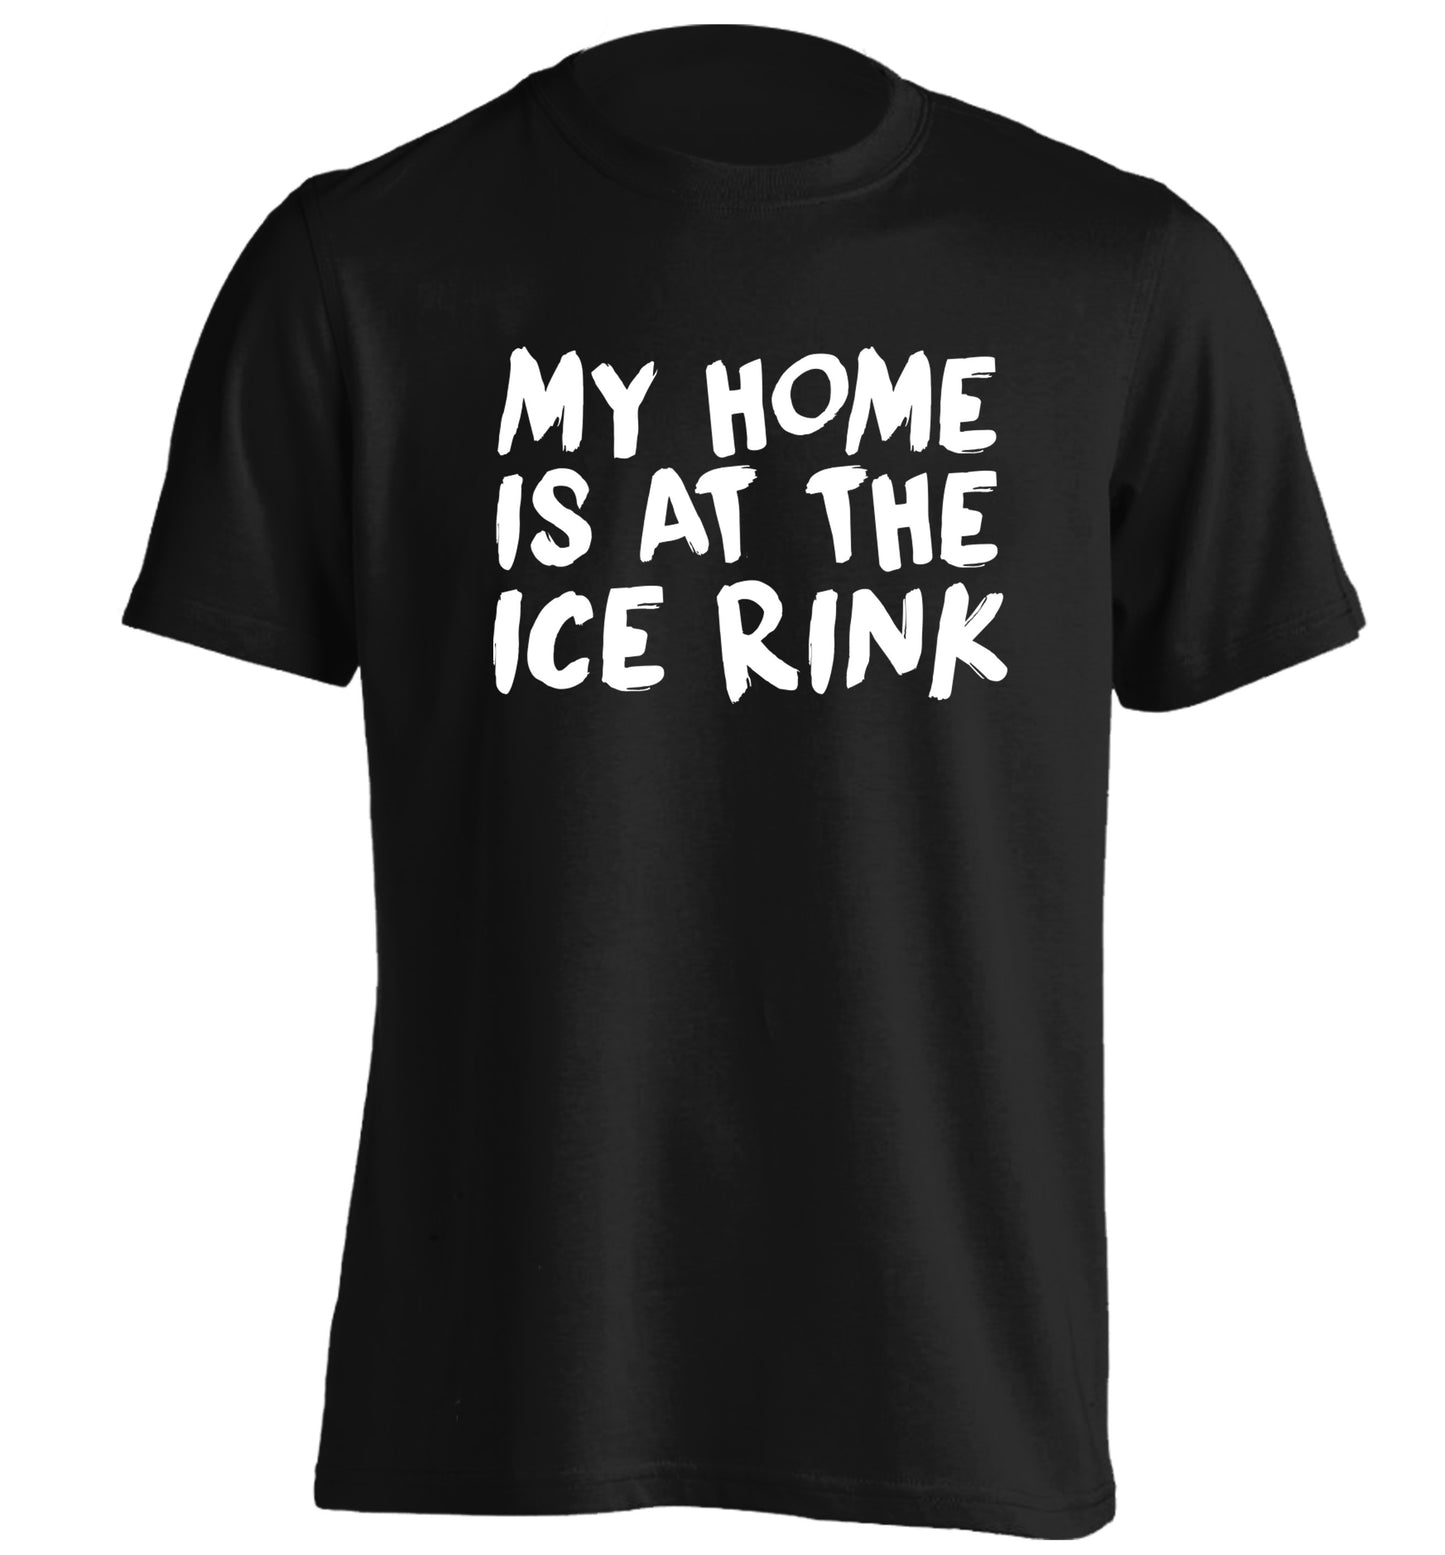 My home is at the ice rink adults unisex black Tshirt 2XL